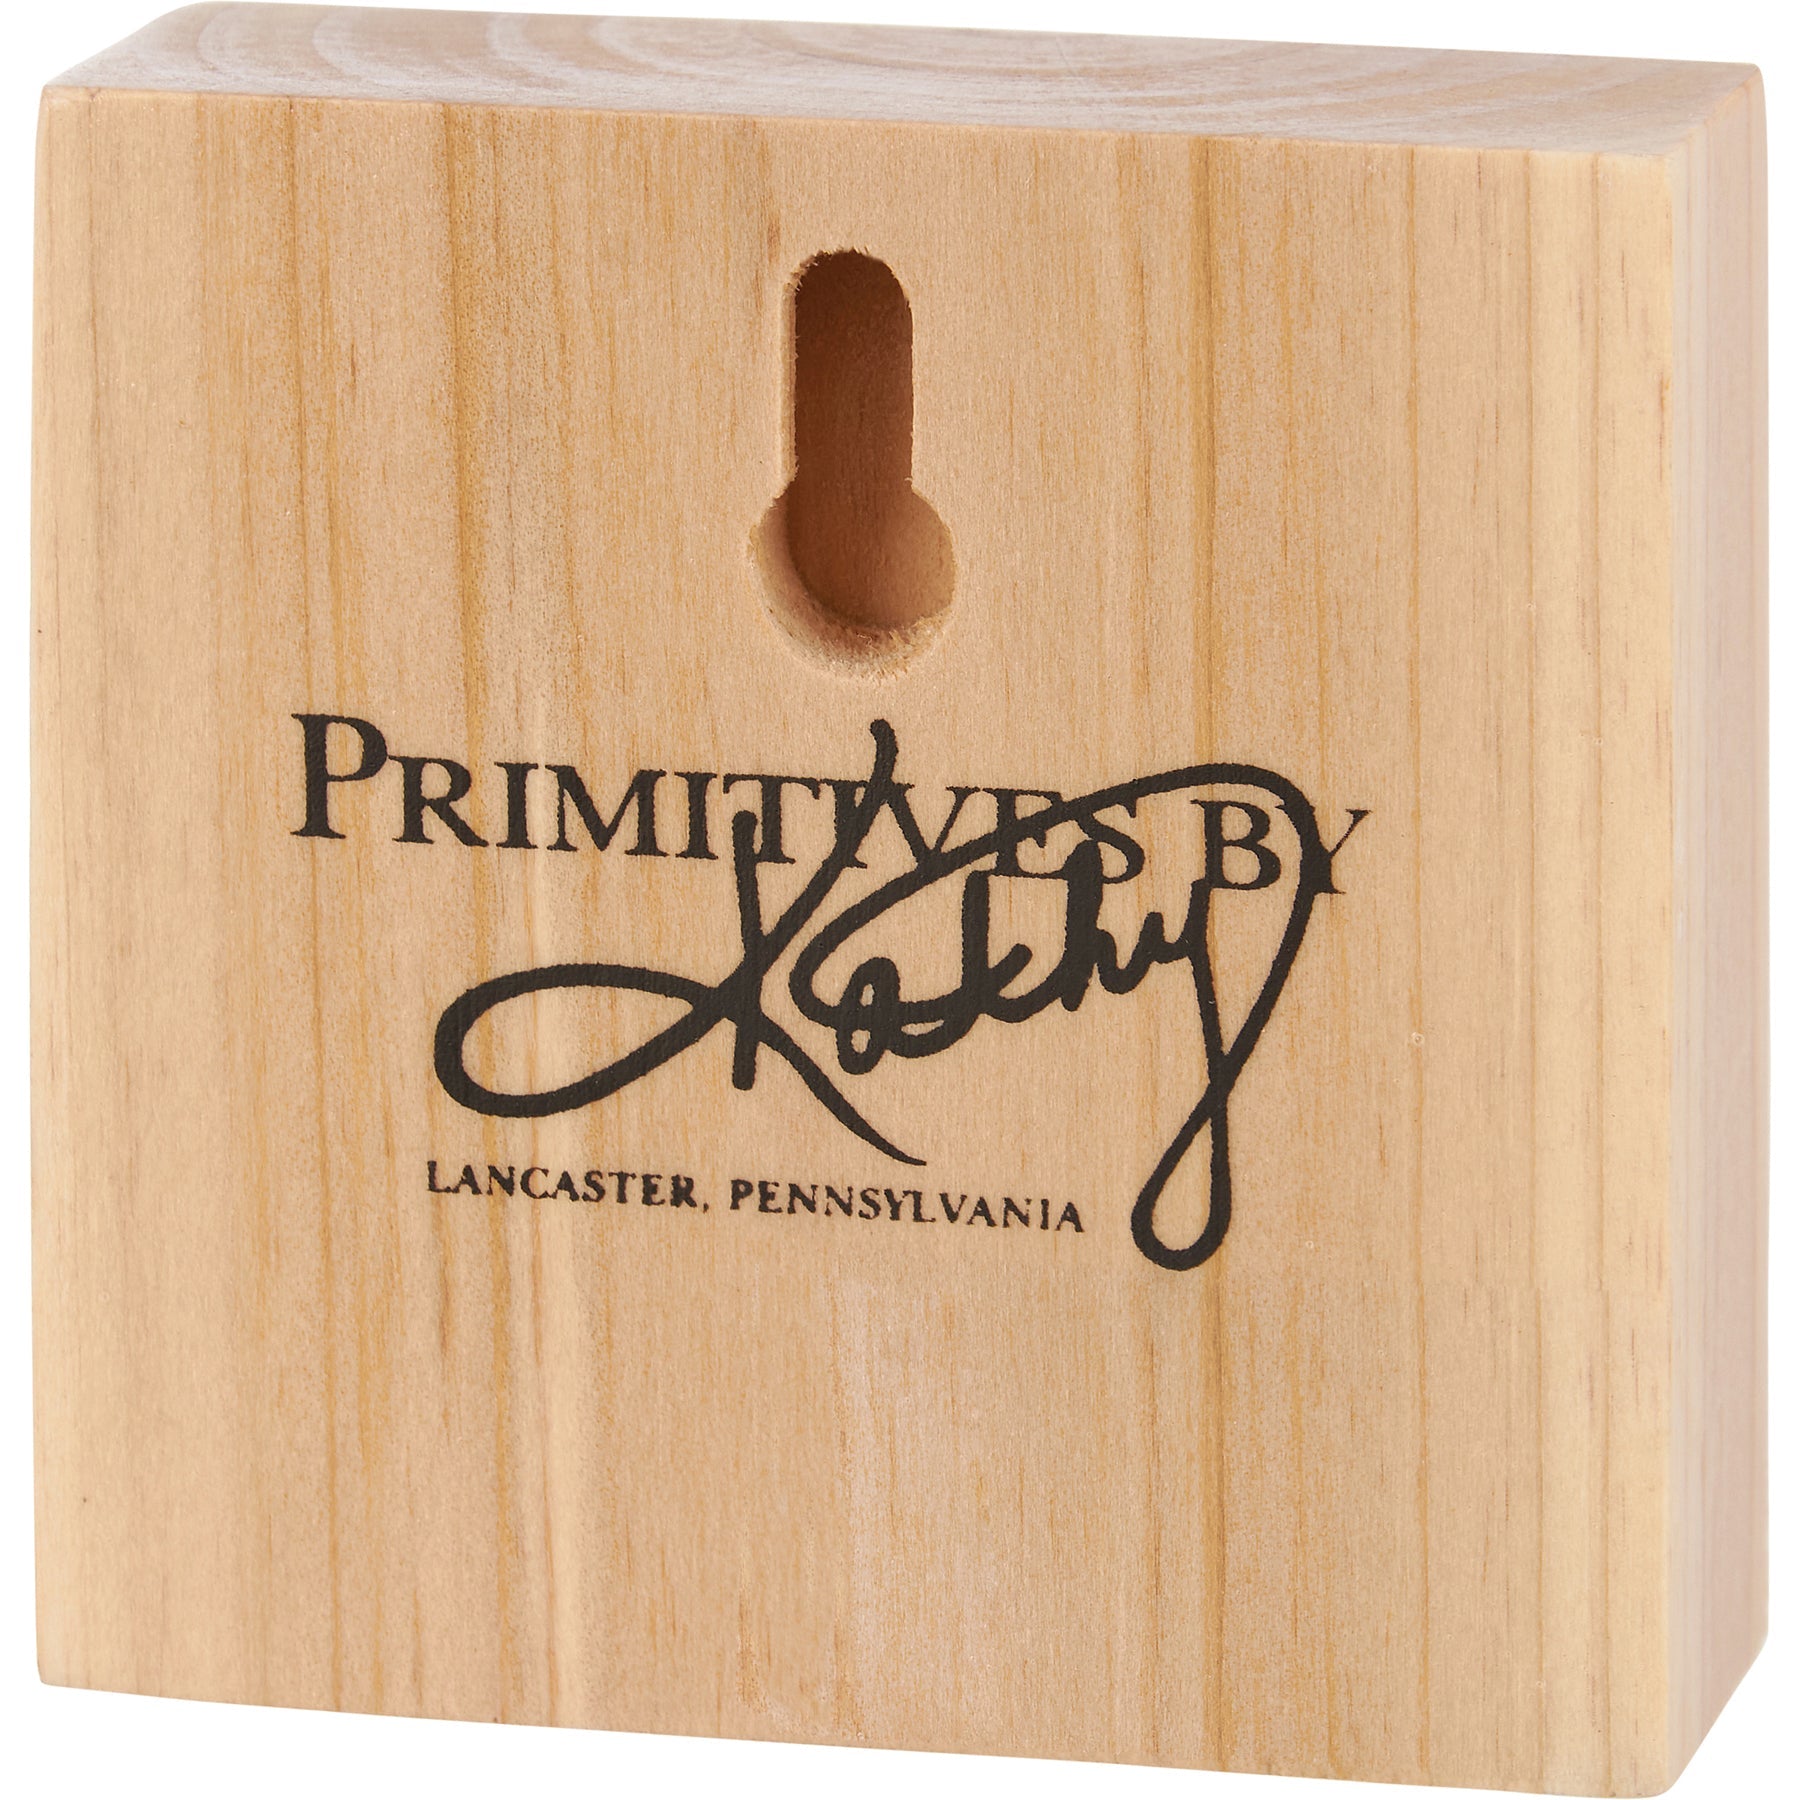 Crazy Love Block Sign | Pre-drilled Keyhole | 3" x 3"